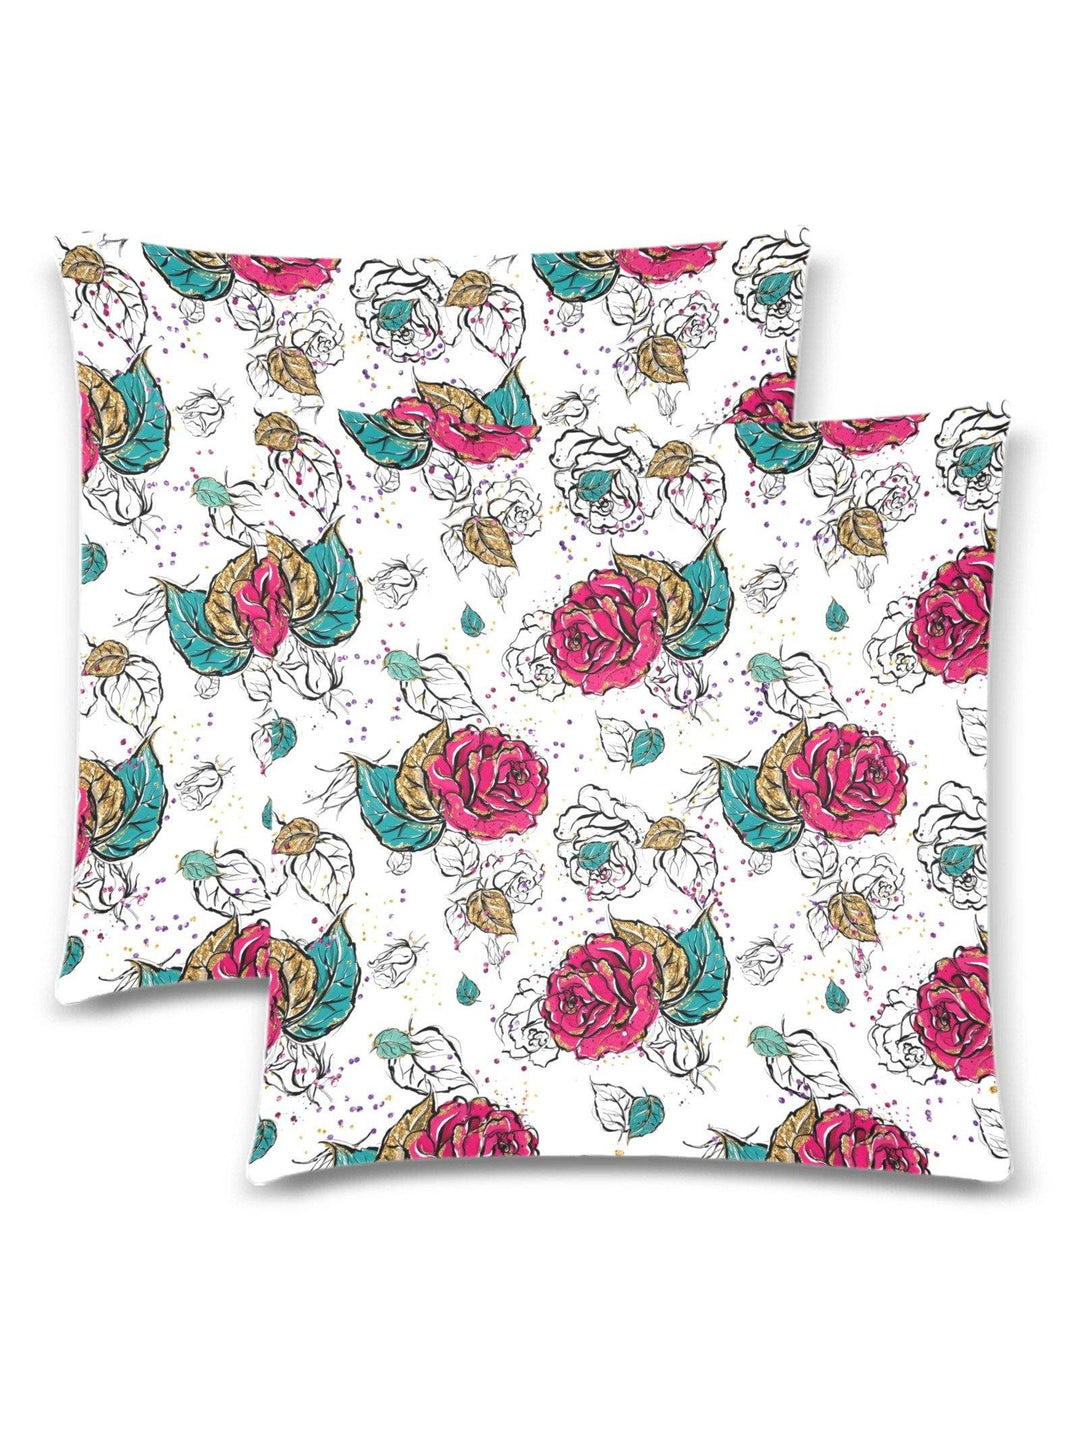 Rose Garden Throw Pillow Cover 18"x 18" (Twin Sides) (Set of 2)